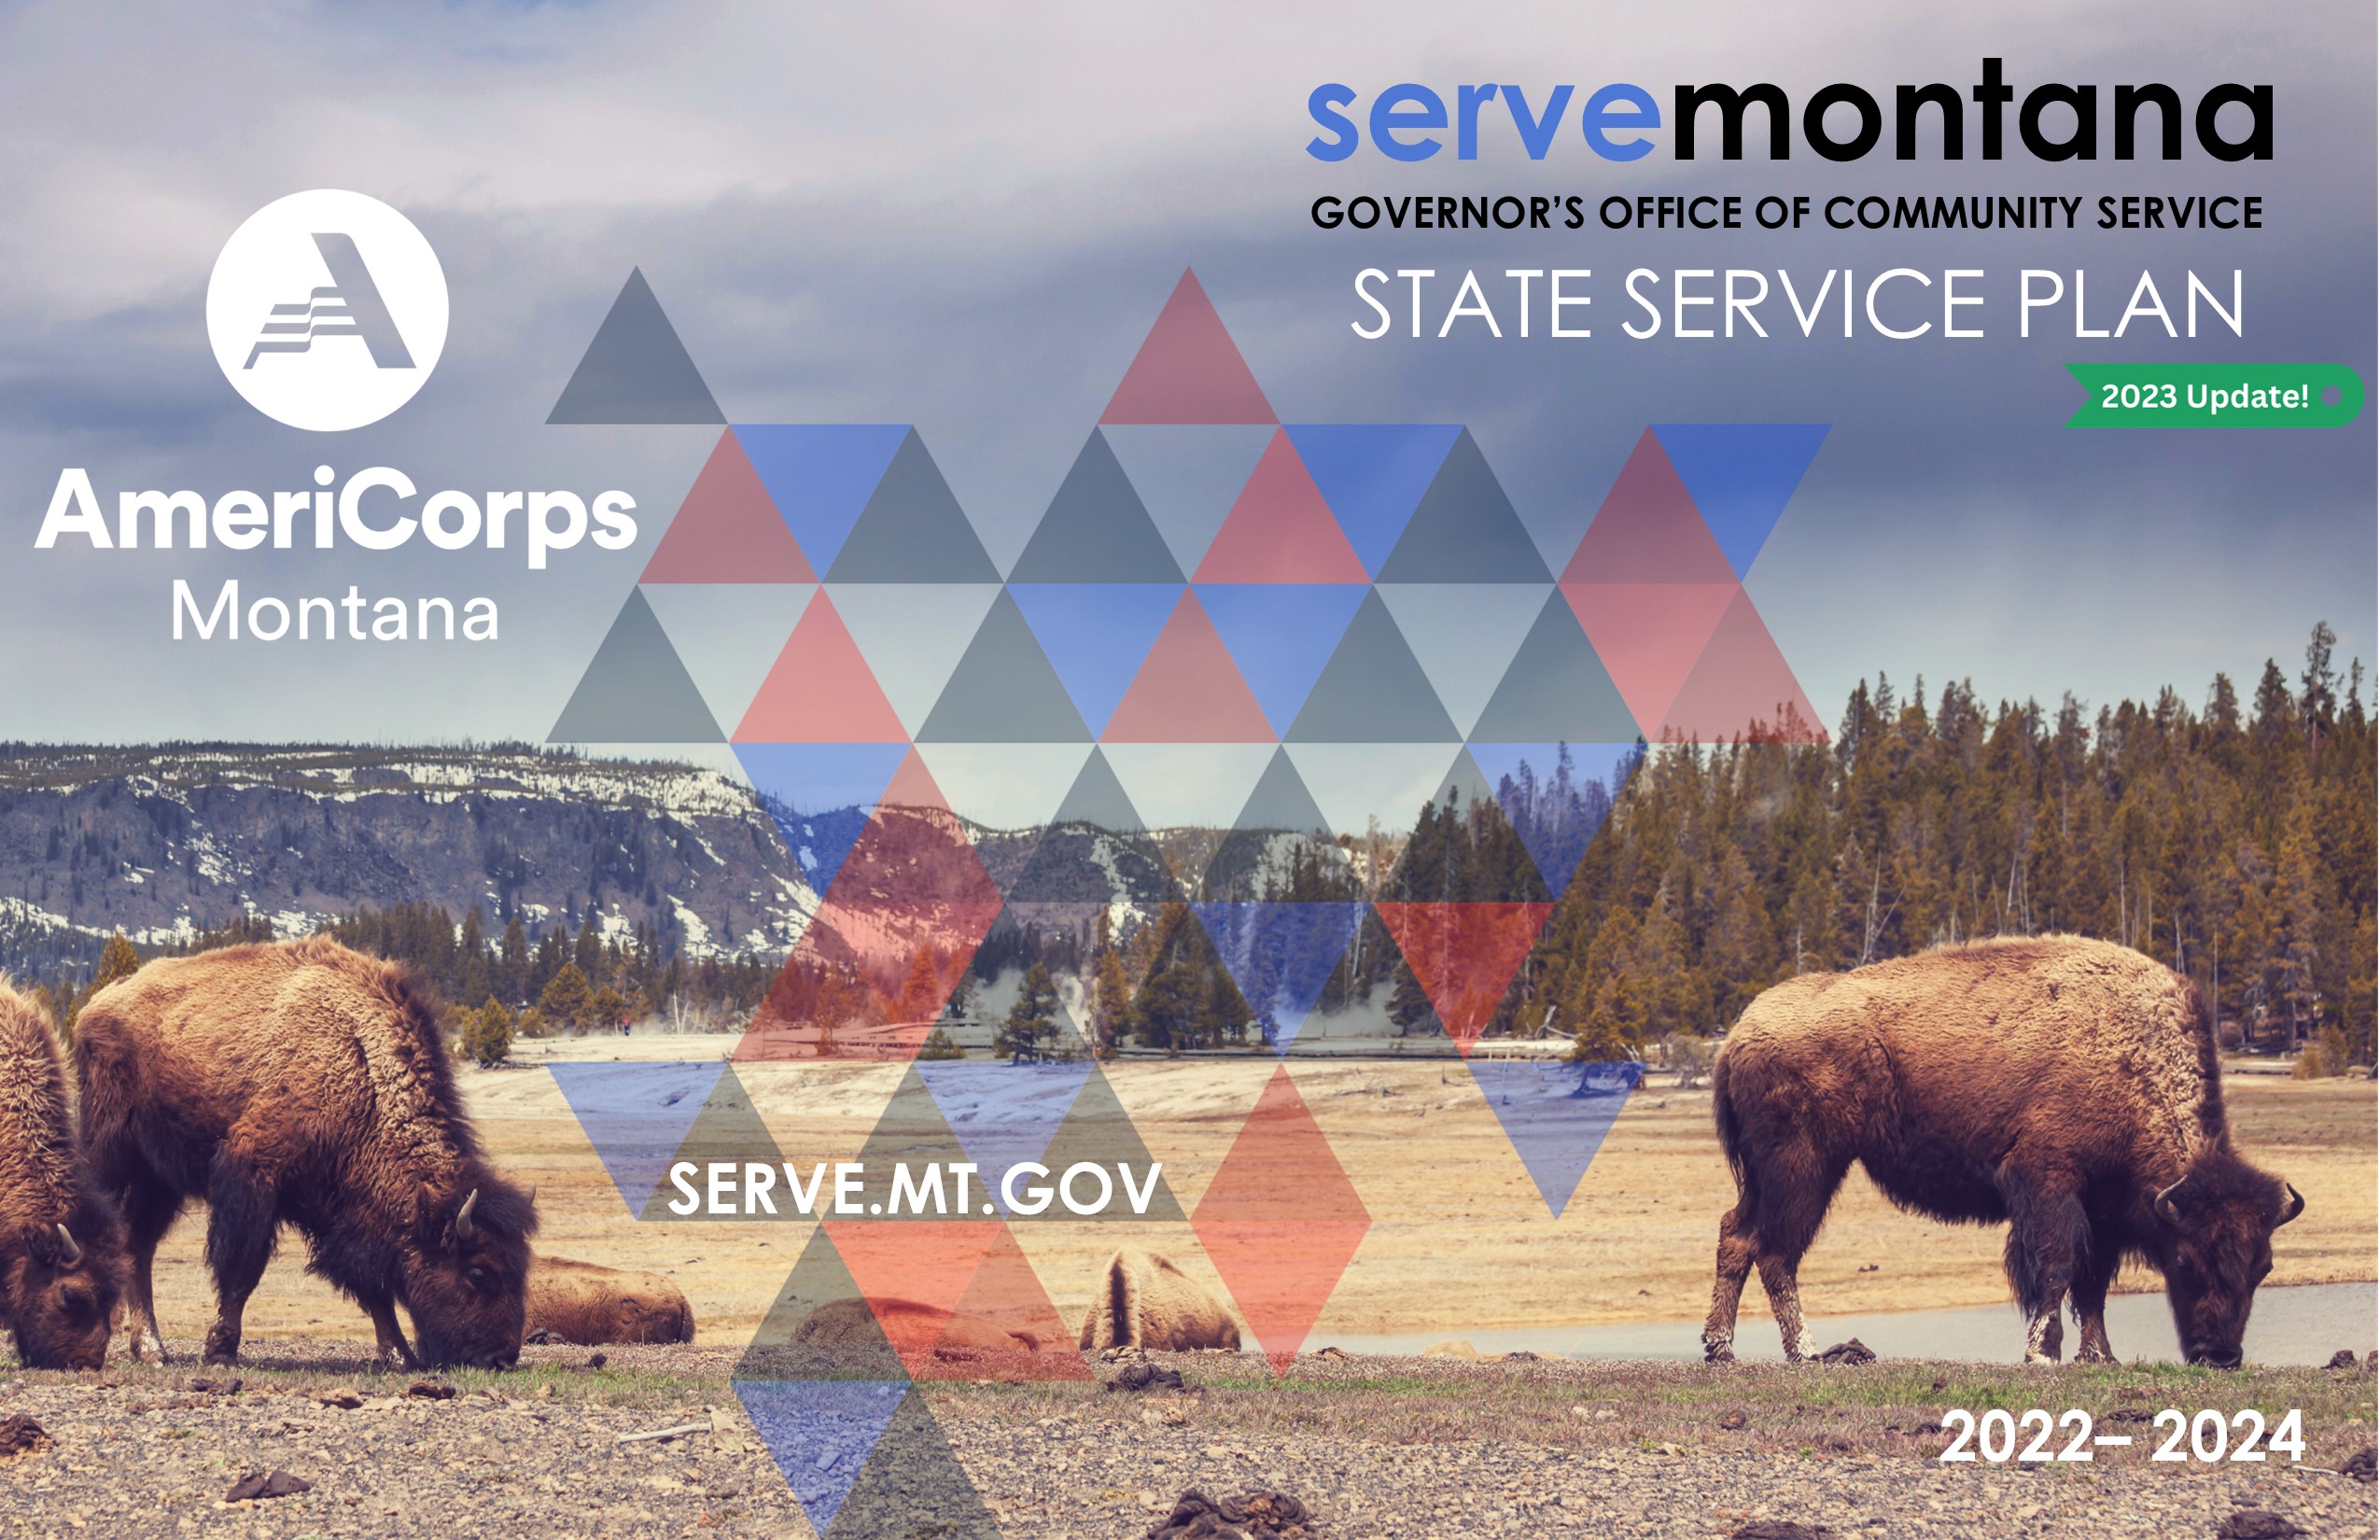 An image of bison grazing with the title State Service Plan 2023 Update and the AmeriCorps Logo and the ServeMontana Logo.